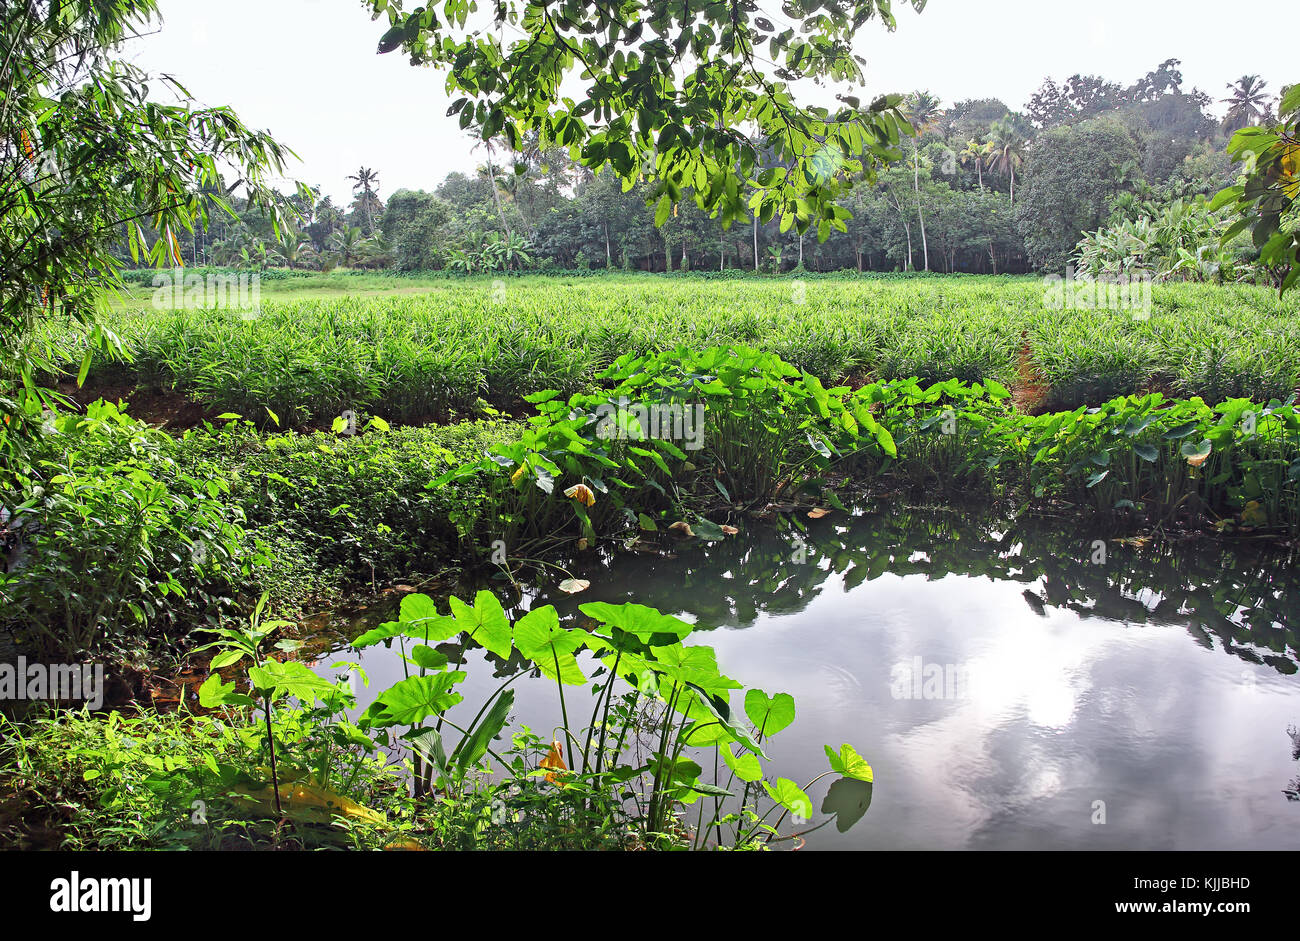 Tranquil scene of ginger plantation beside irrigation pond with water collected through rain water harvesting in Kerala, India. Stock Photo